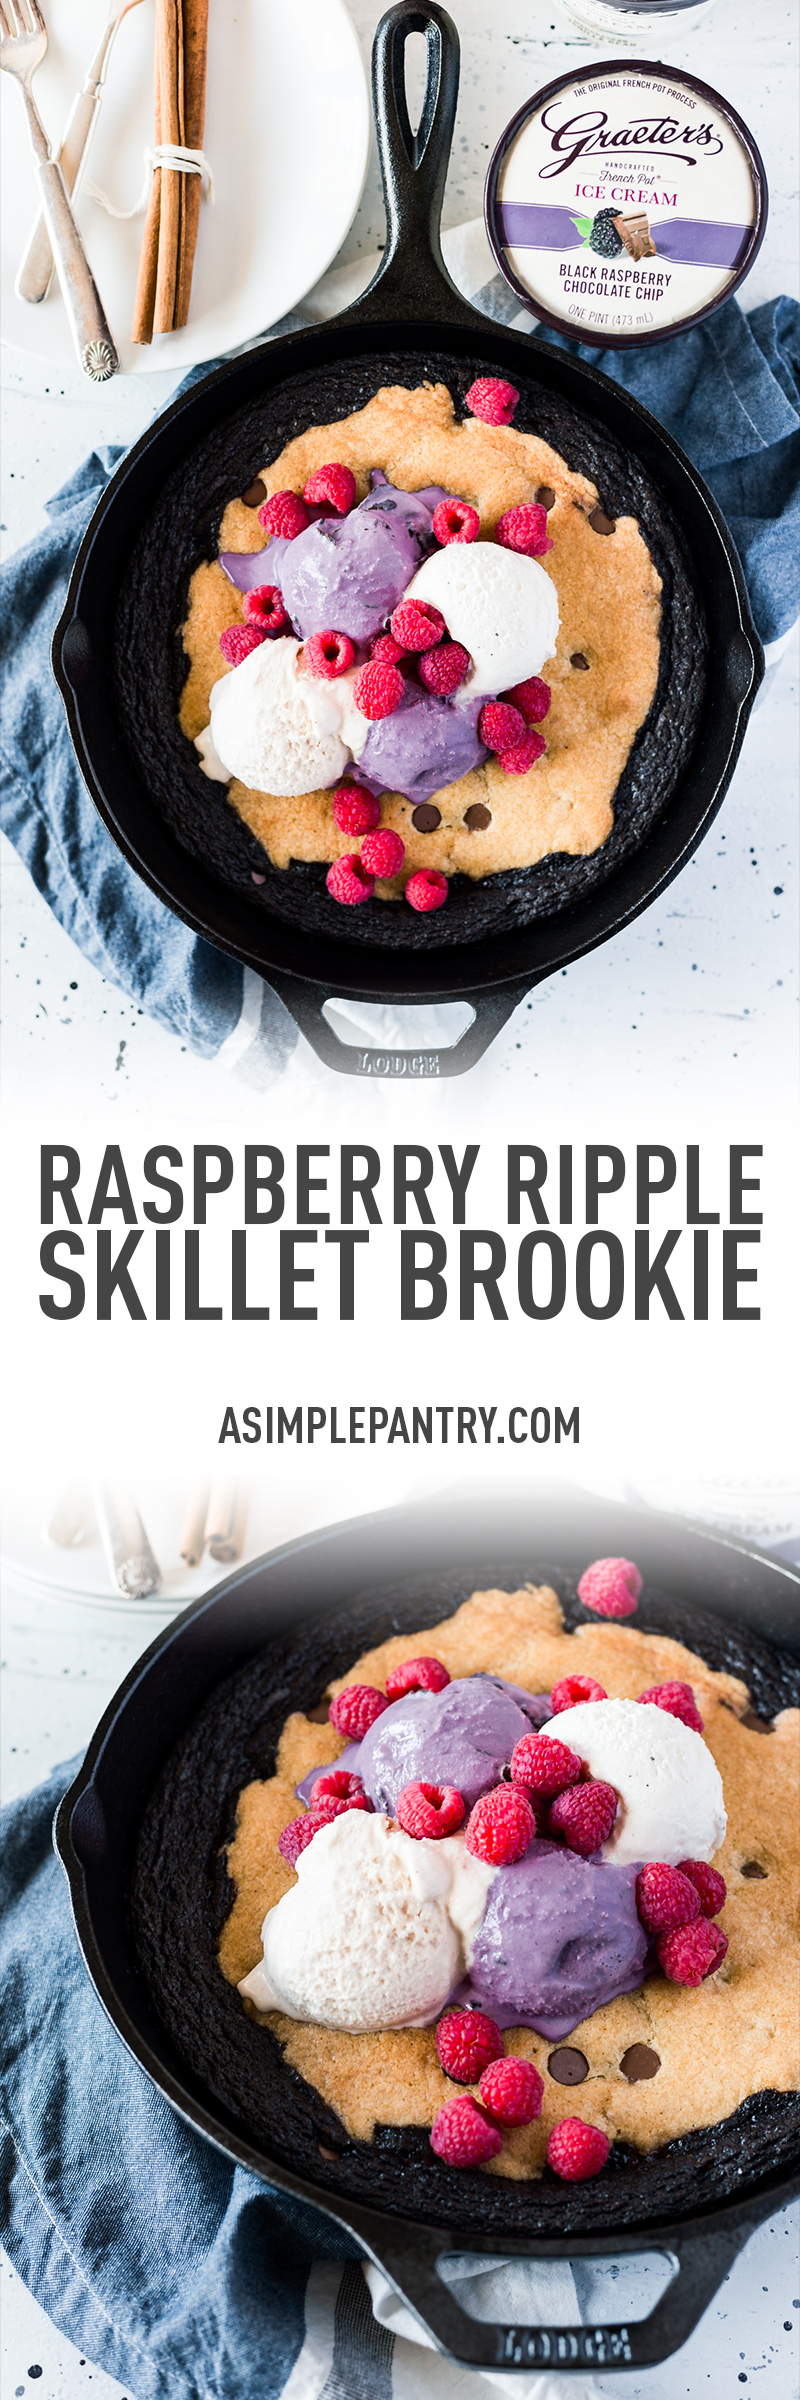 If you're looking for easy recipes for dessert, this Raspberry Ripple Skillet Brookie is a definite crowd-pleaser! Serve with your favorite ice cream and enjoy! | asimplepantry.com 